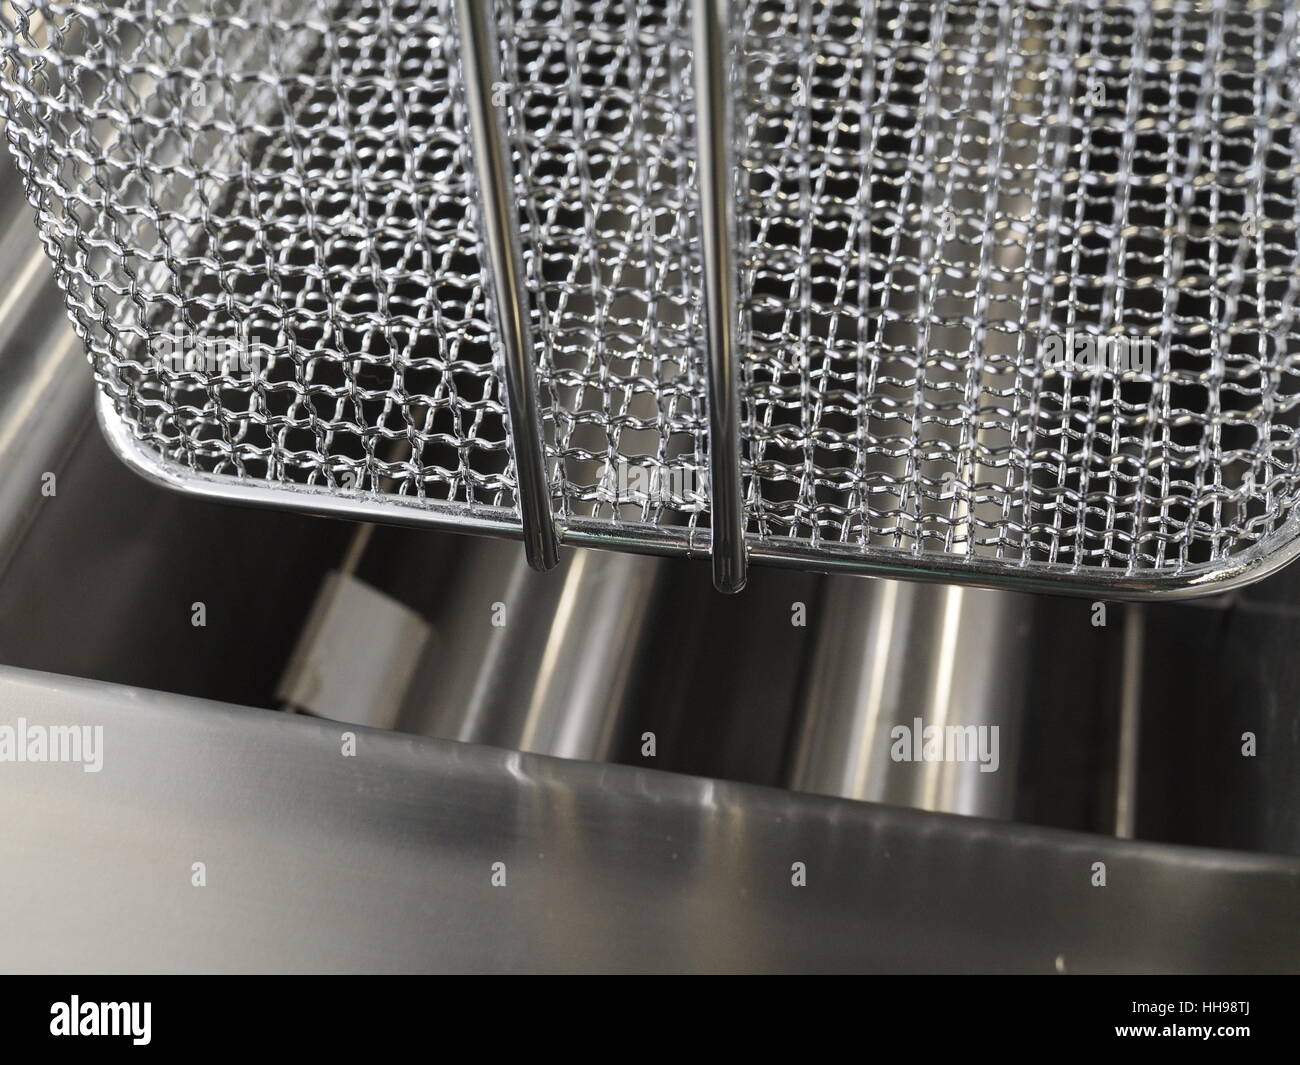 Industrial kitchen appliances for industrial kitchens; fryer detail, gas powered Stock Photo